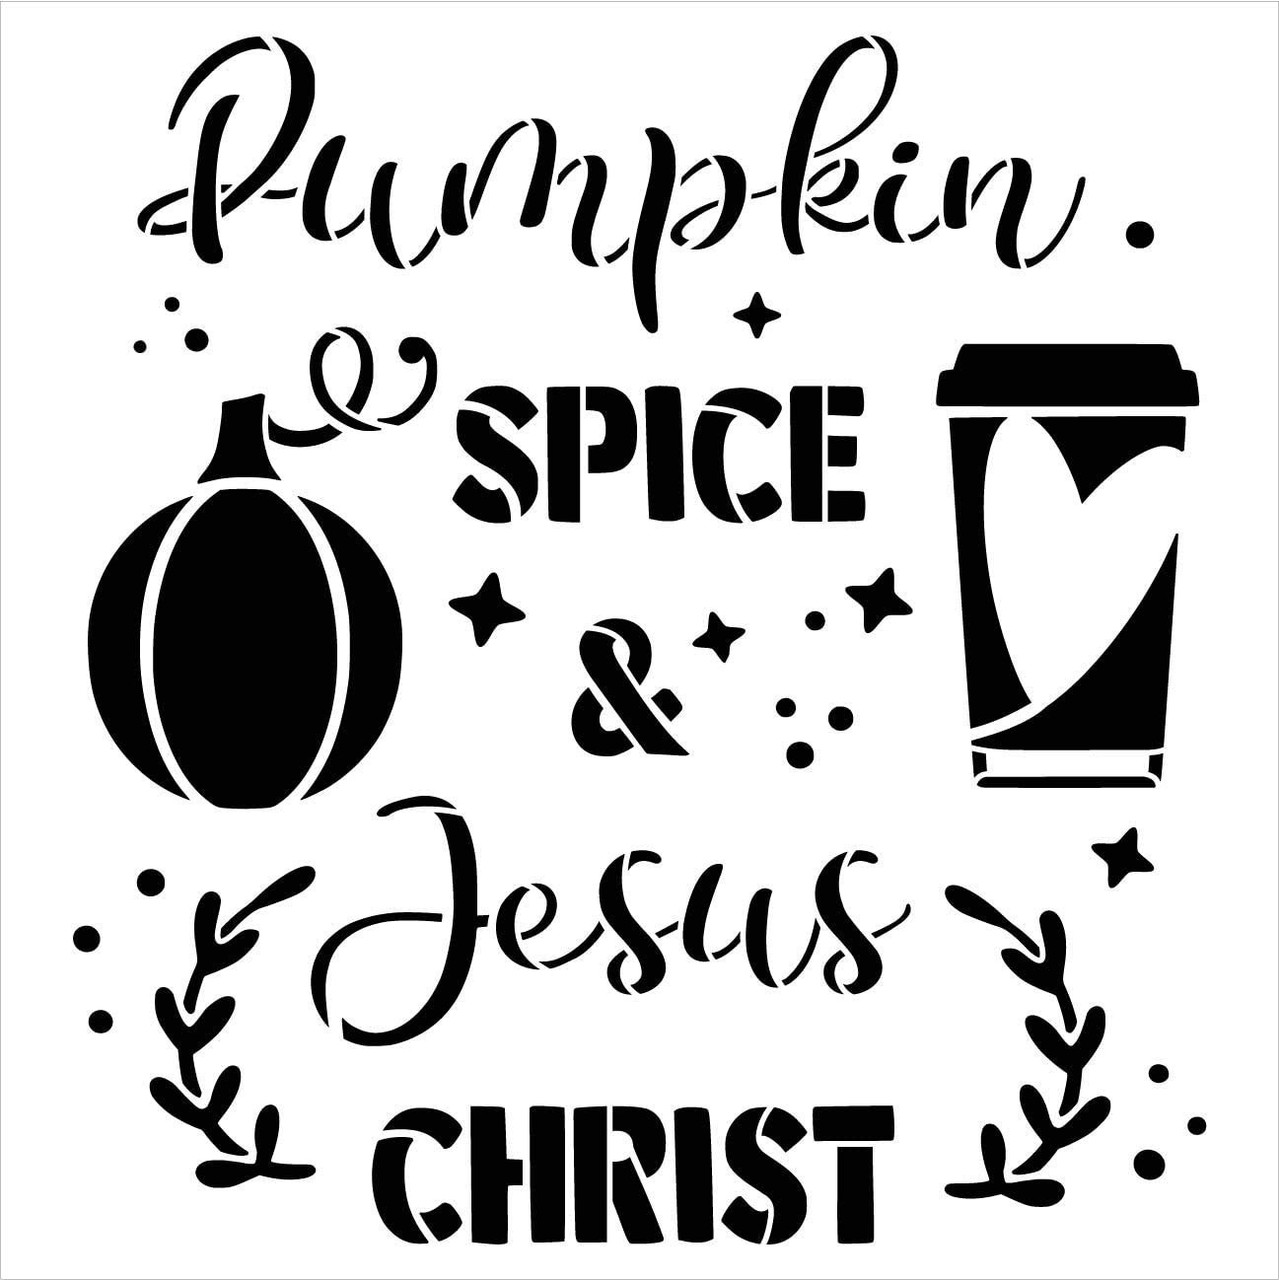 Pumpkin Spice & Jesus Christ Stencil by StudioR12 | DIY Fall Autumn Home Decor Gift | Craft & Paint Wood Sign | Reusable Mylar Template | Select Size